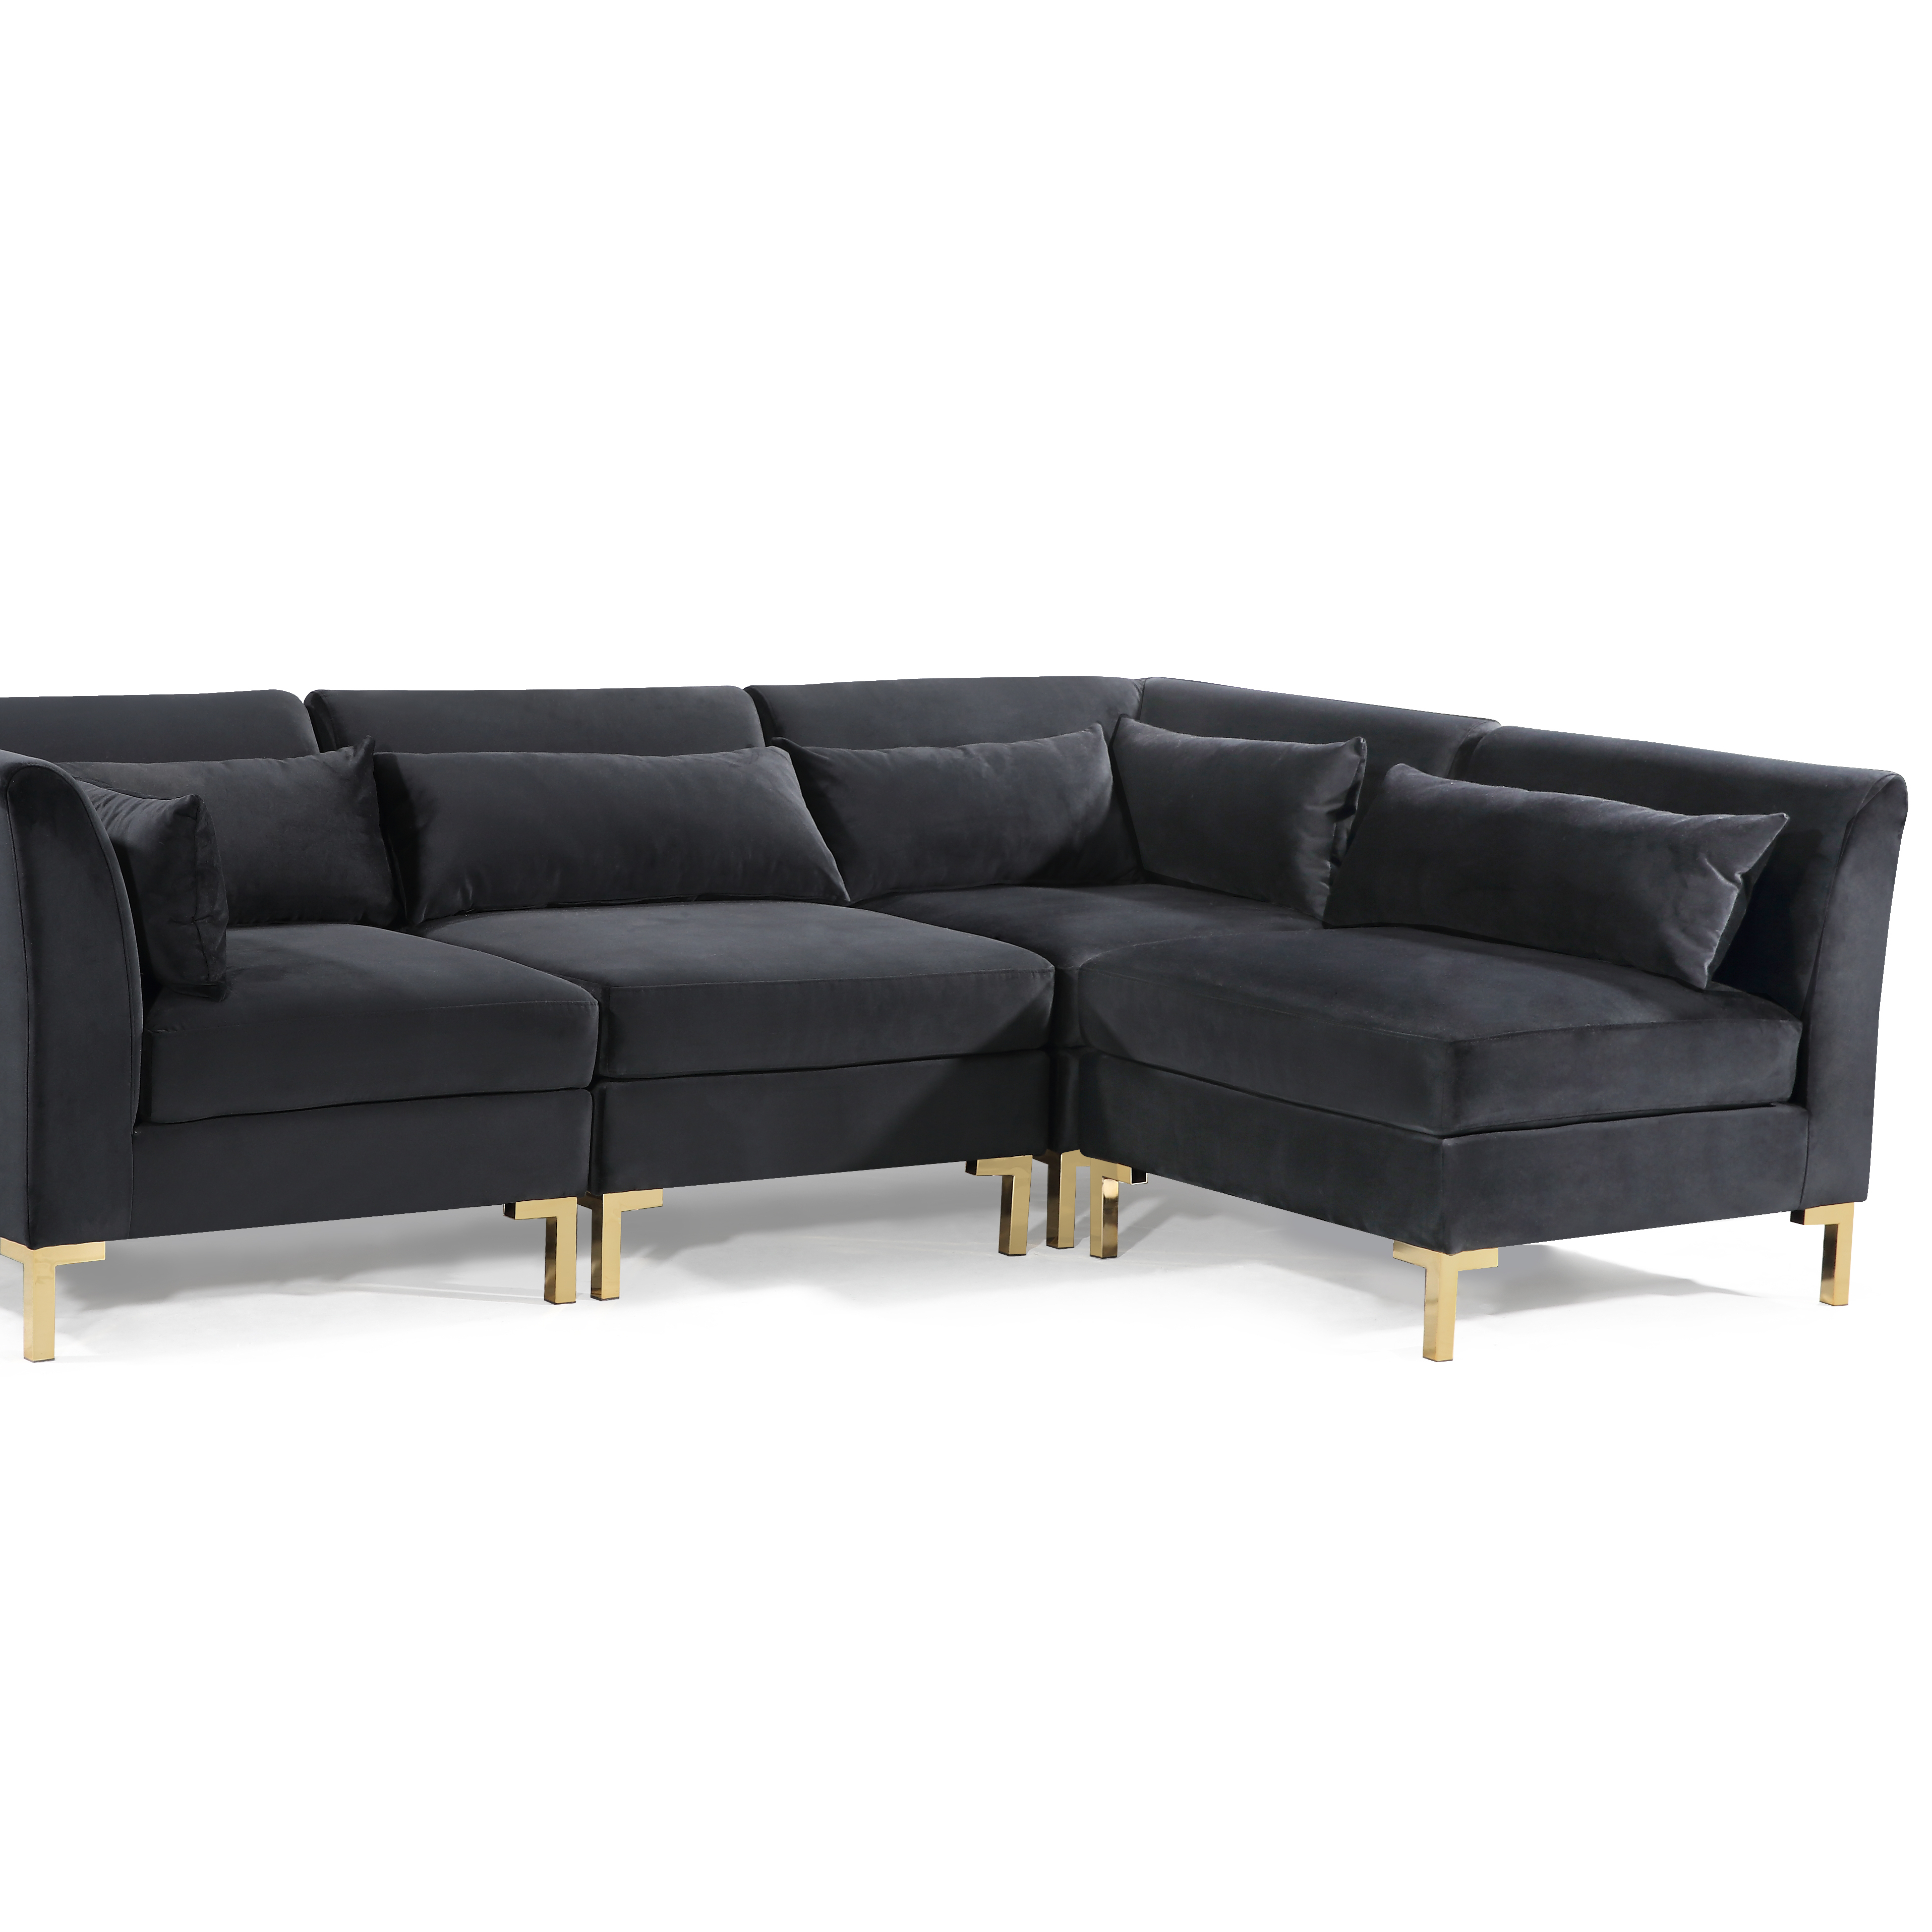 Greco Modular Chaise Sectional Sofa Solid Gold Tone Metal Y-Leg With 6 Throw Pillows - Black